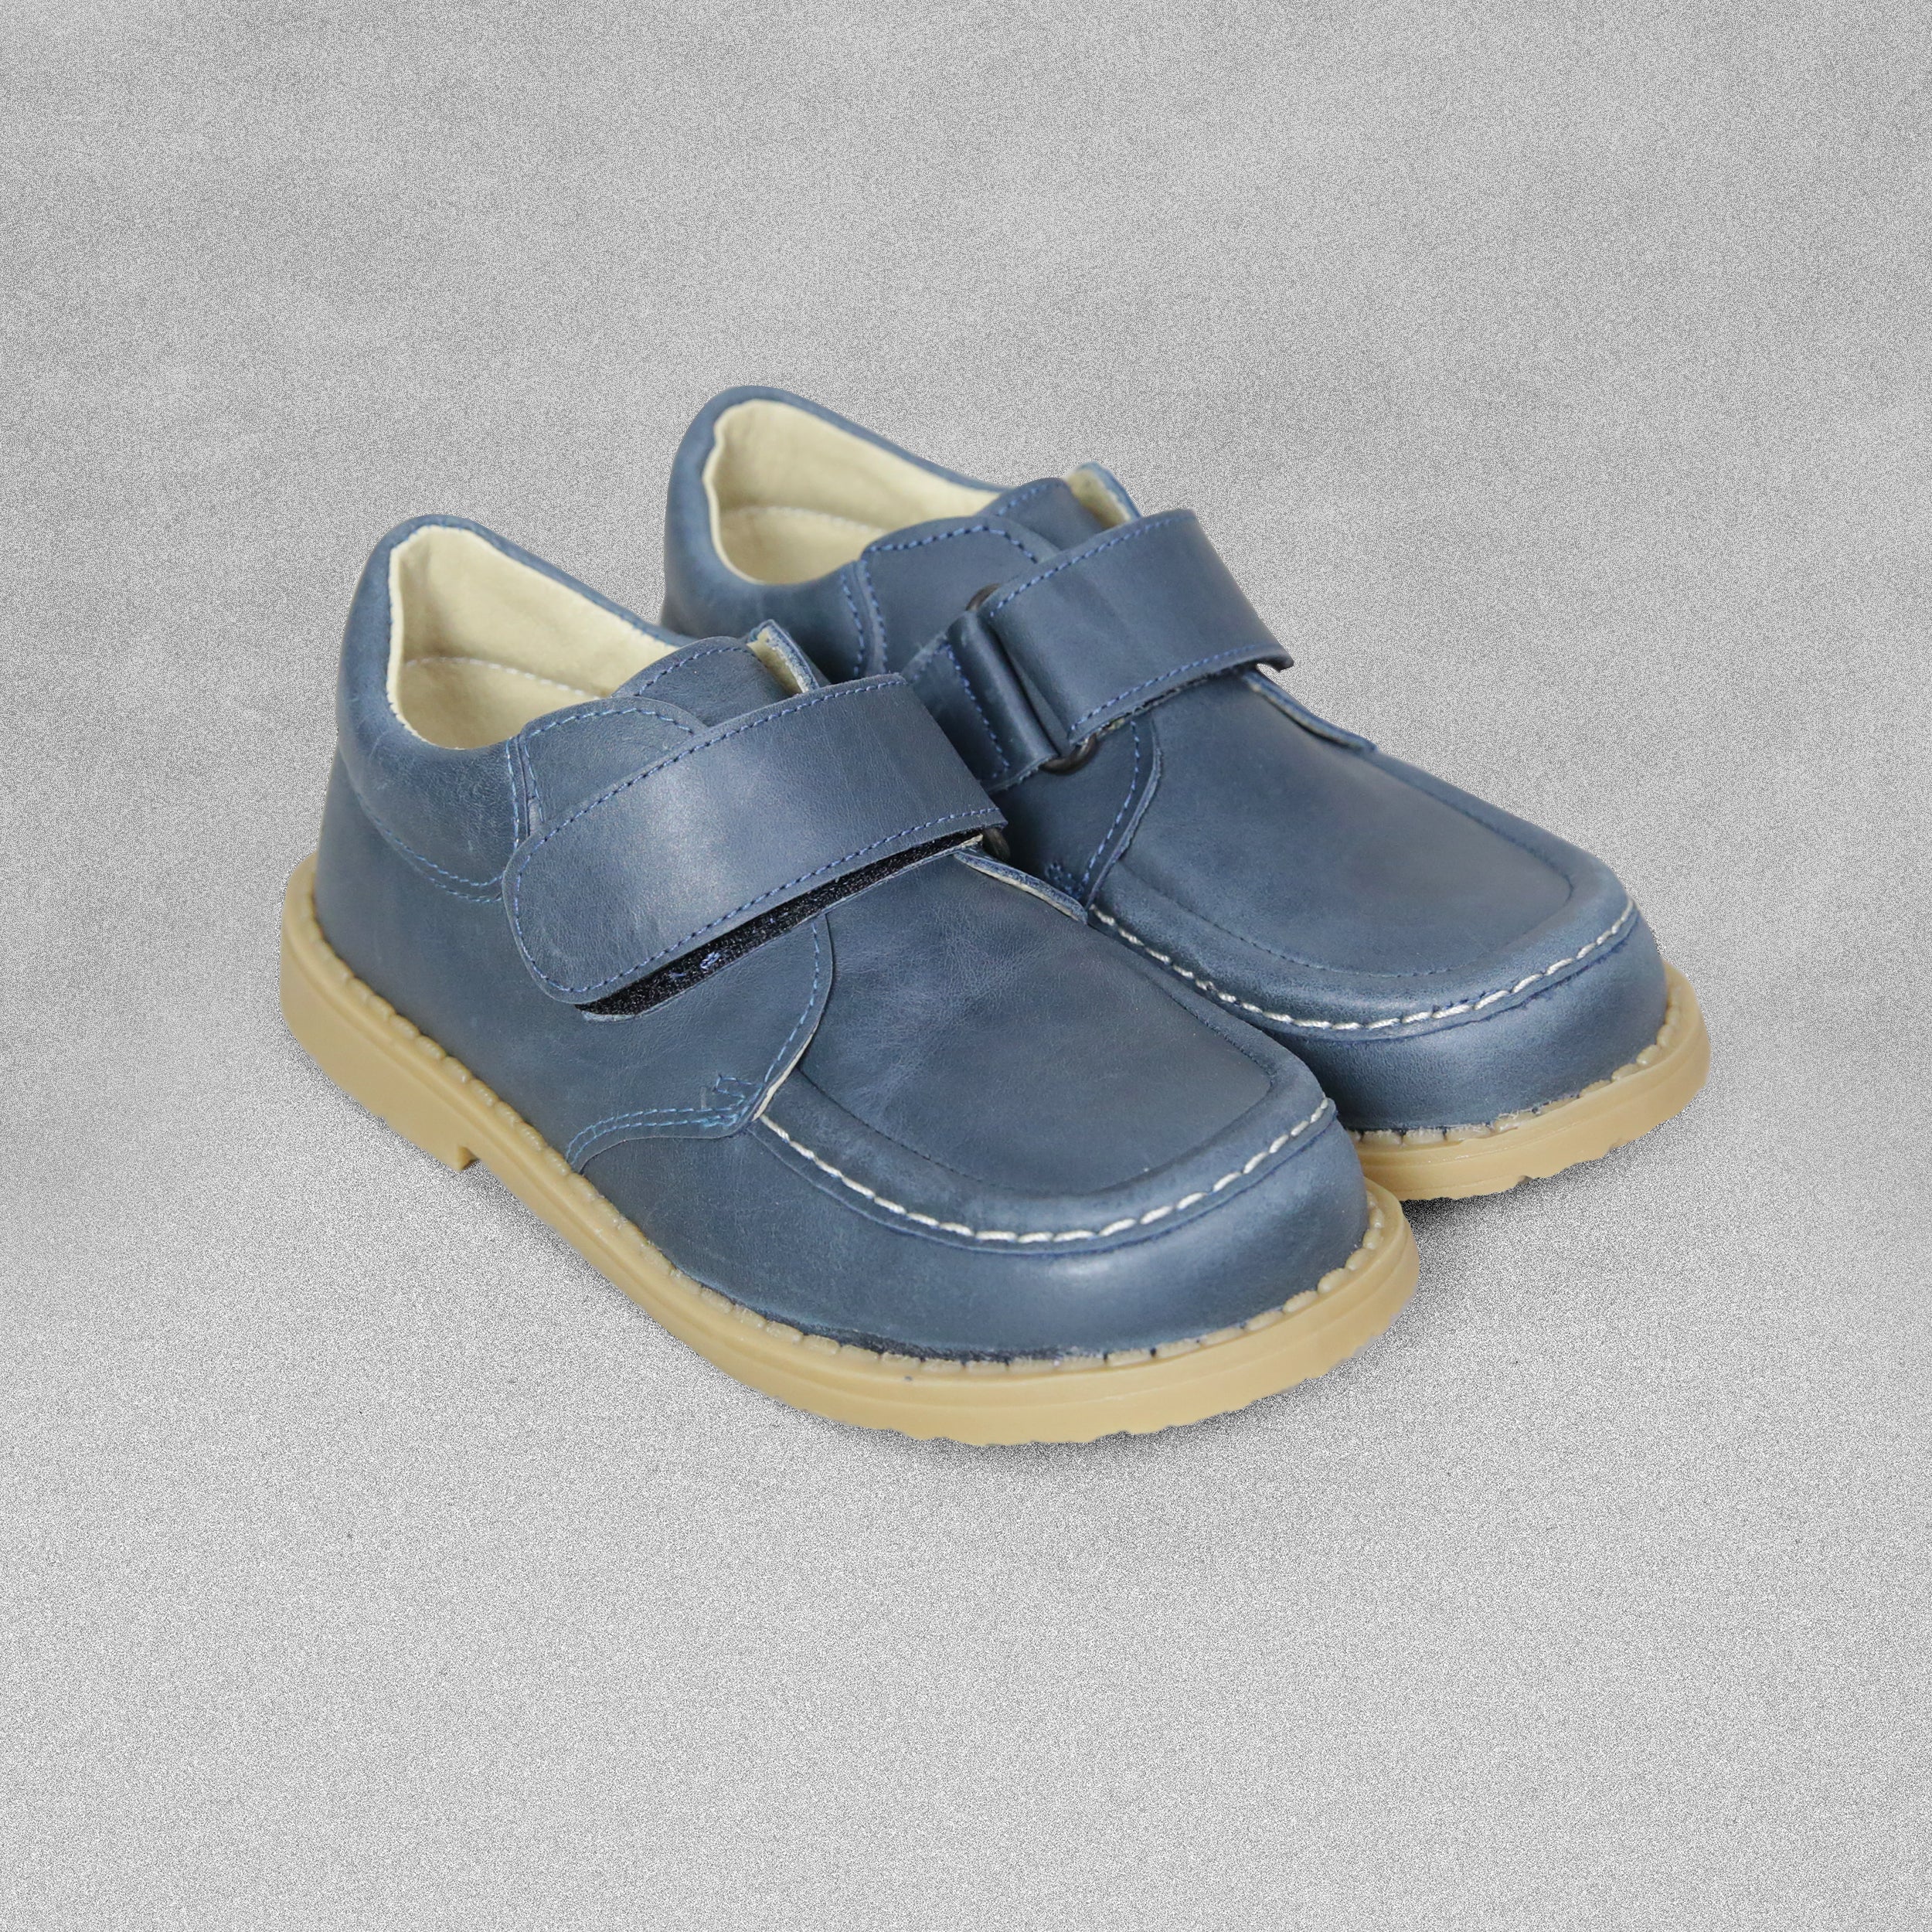 Shoeting Stars Slate Blue Shoes with Velcro Strap